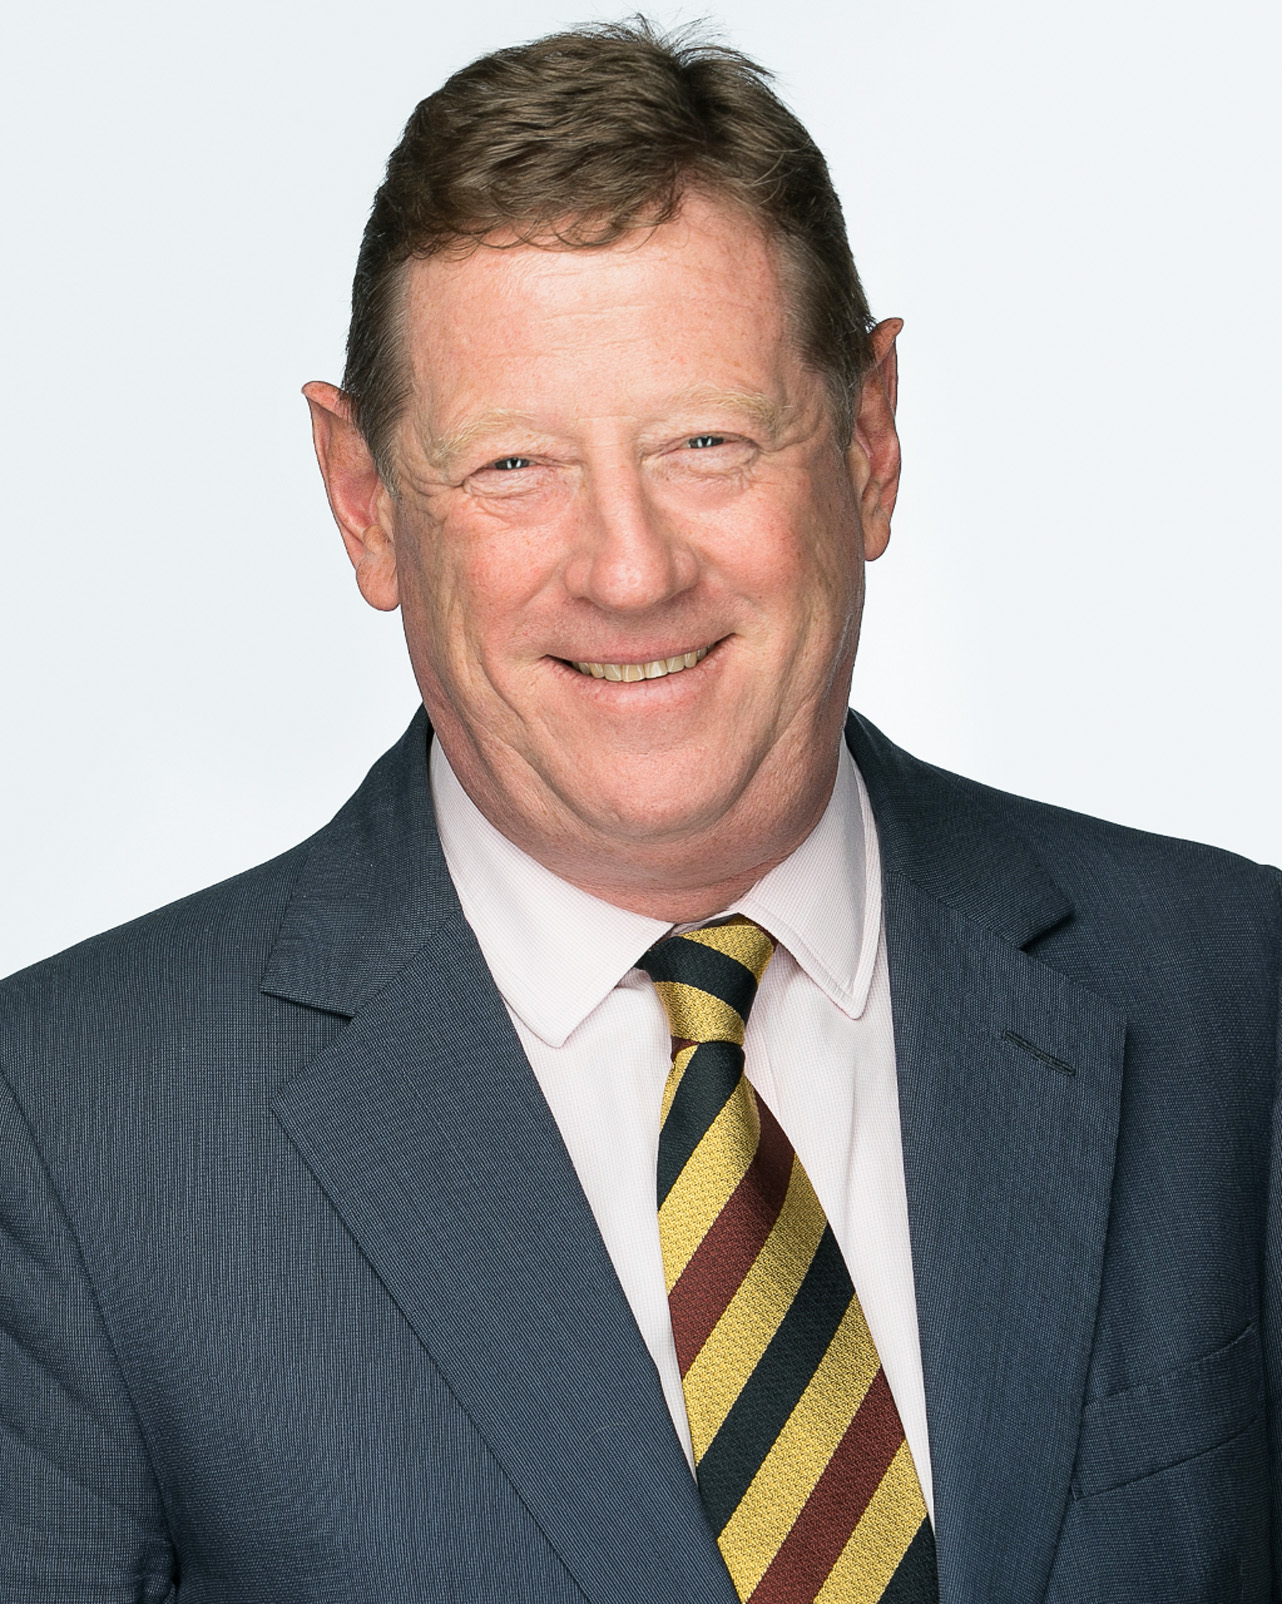 Tim Wates announced as next Chairman of Wates Group